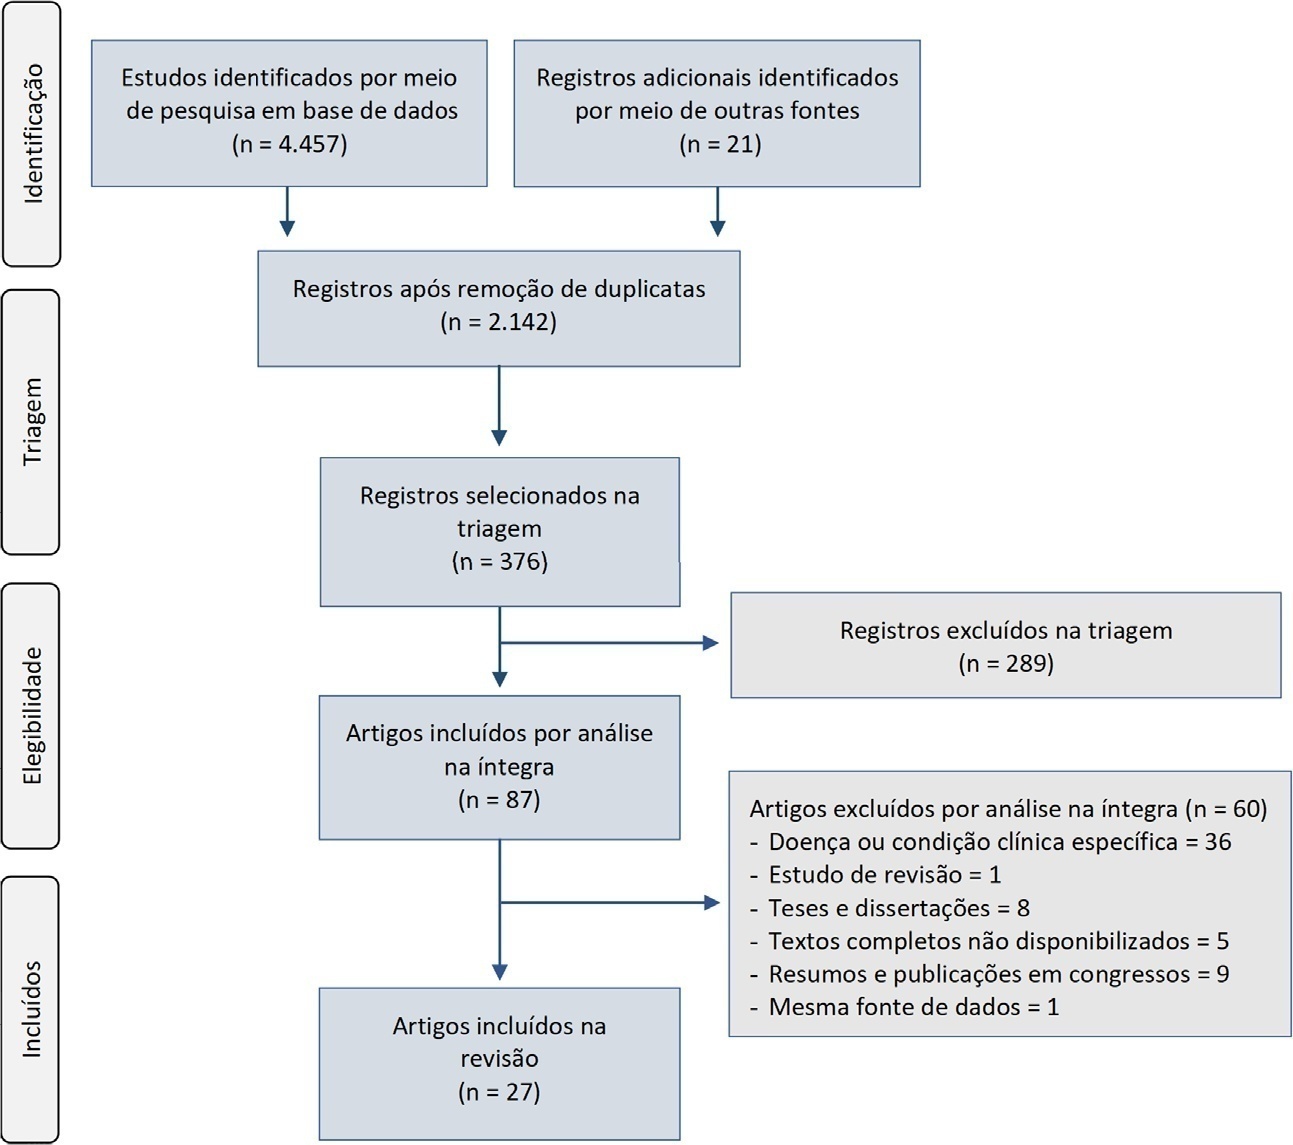 Profile of adult intensive care units in Brazil: systematic review of observational studies